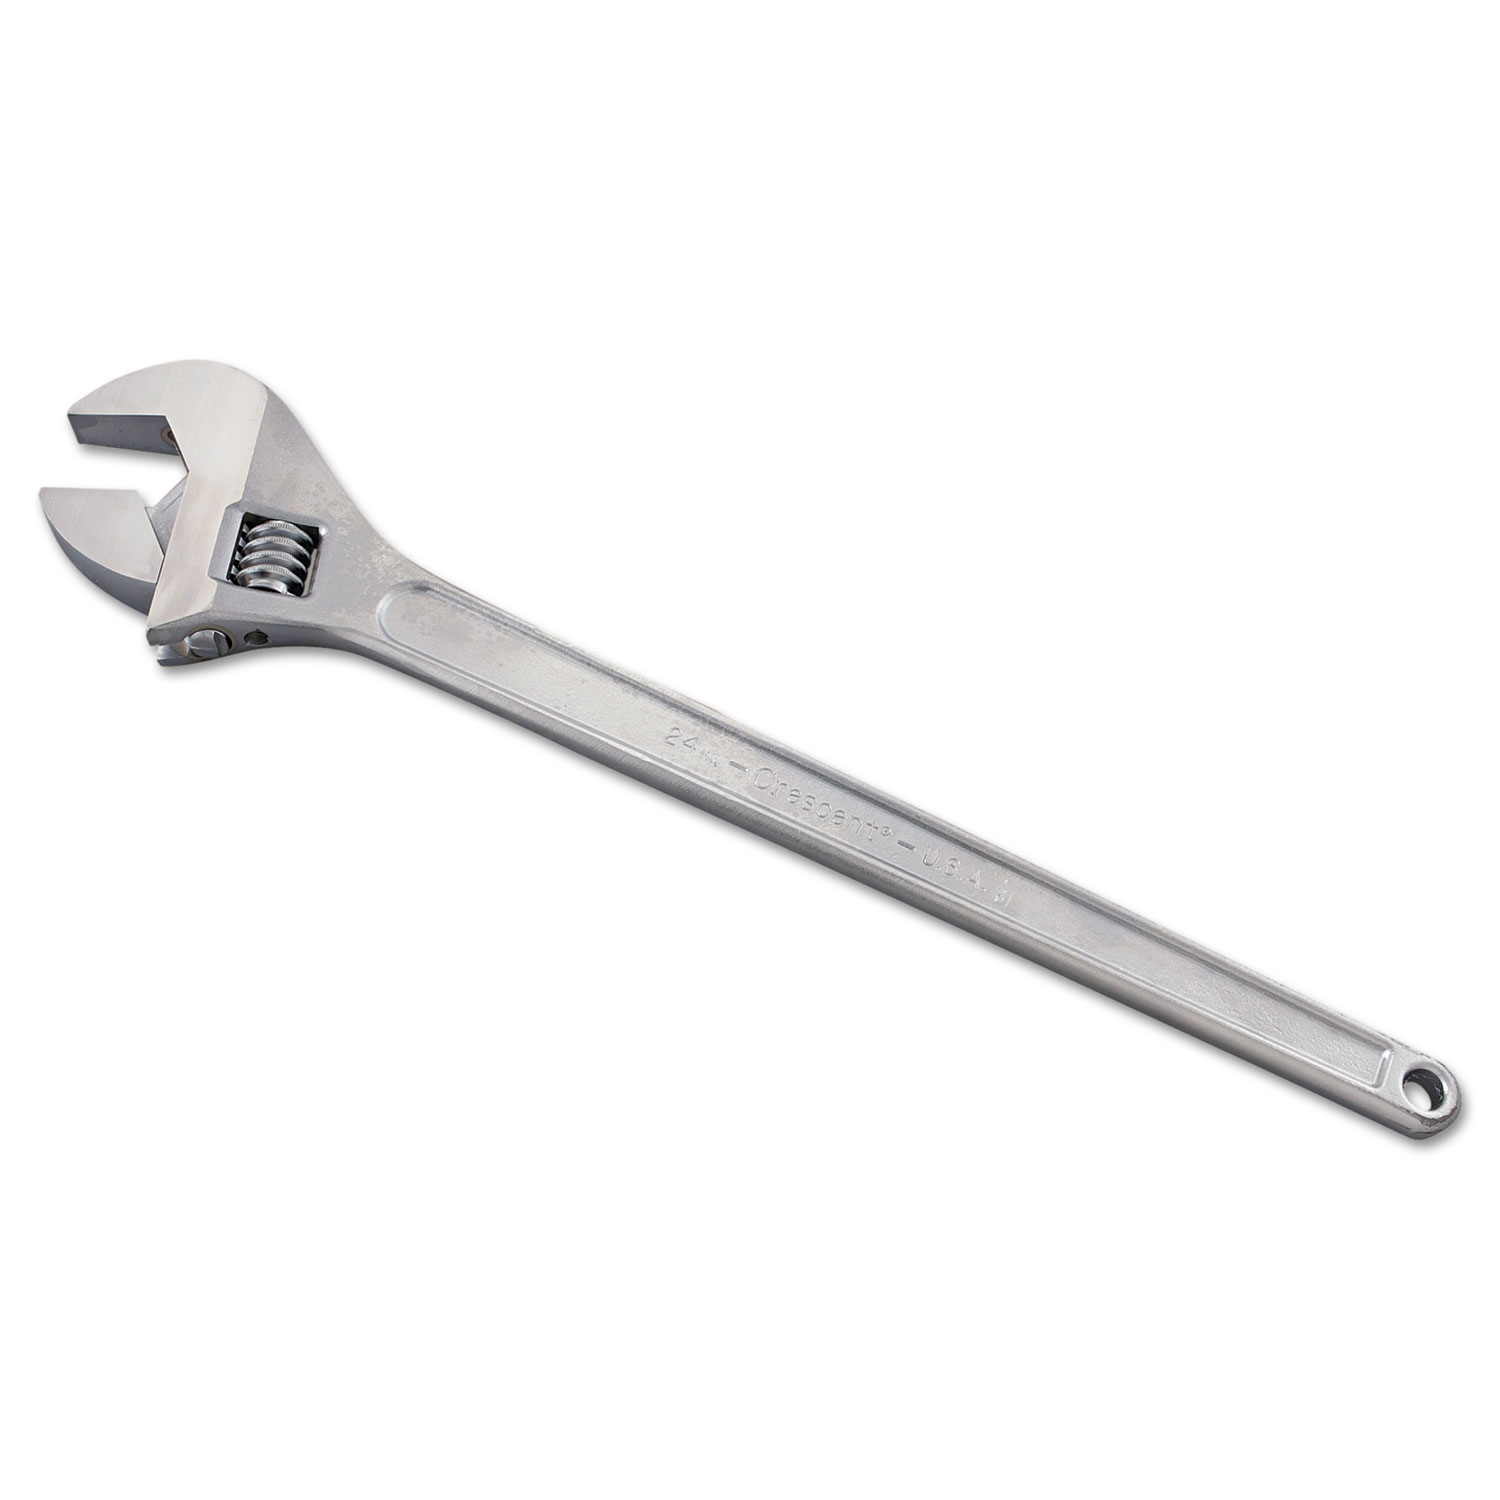 Crescent Adjustable Wrench, 24 Long, 2 7/16 Opening, Chrome